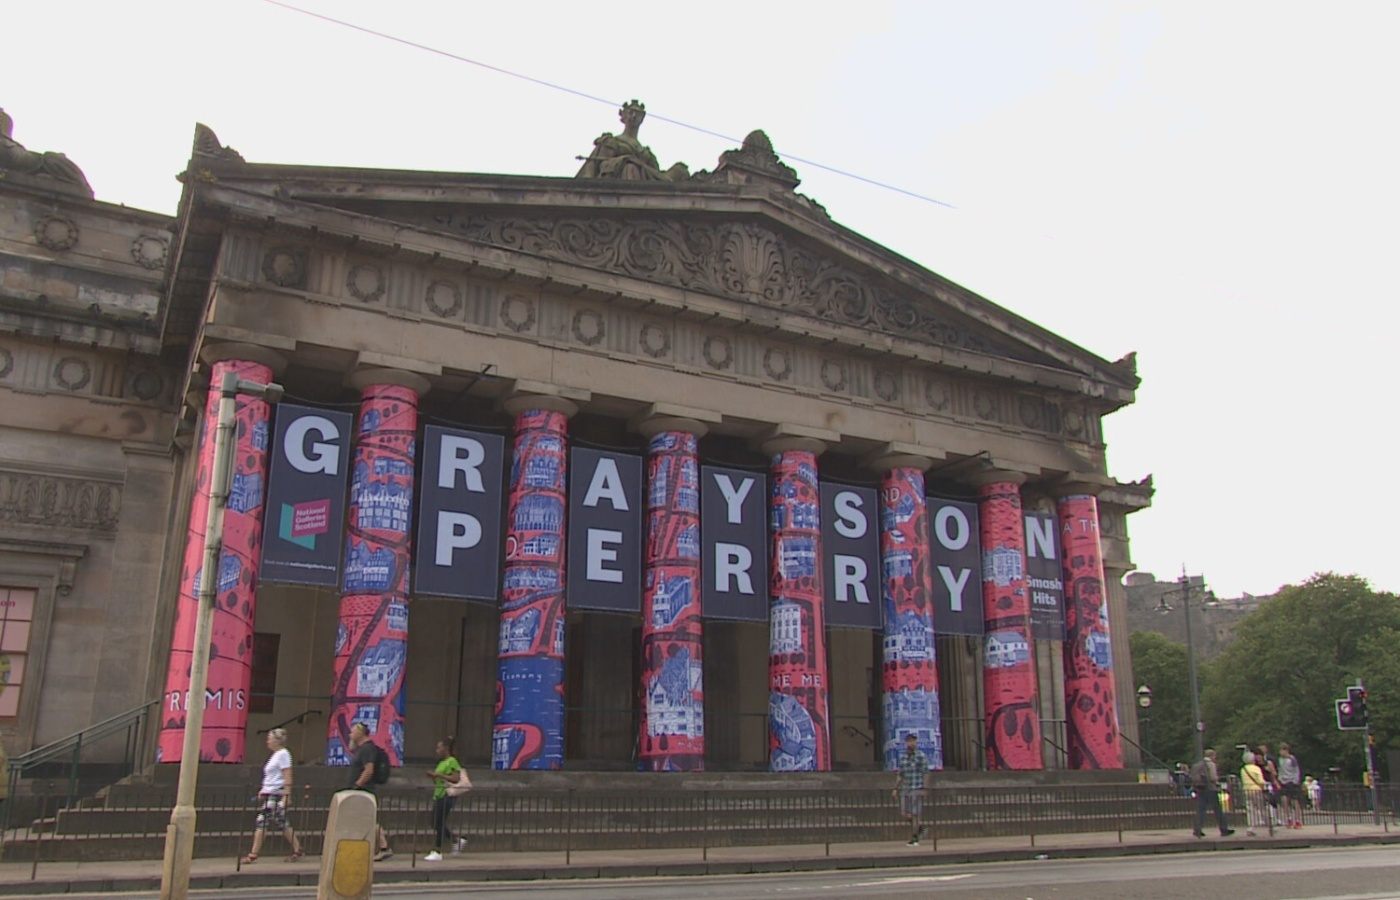 The exhibition is being held at at Edinburgh’s Royal Scottish Academy at the National Galleries on The Mound.